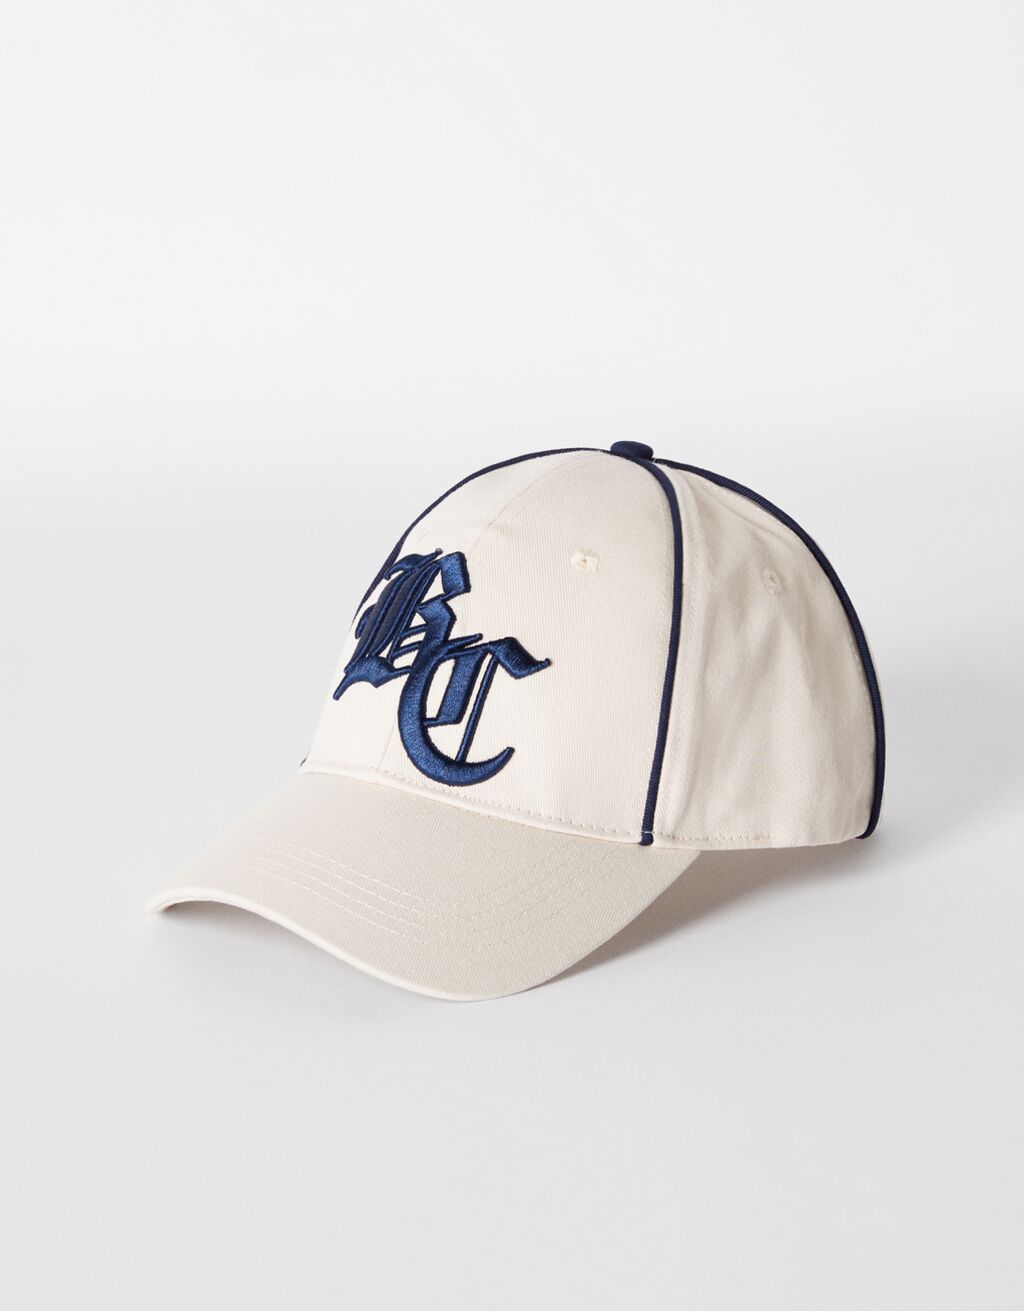 Embroidered varsity cap